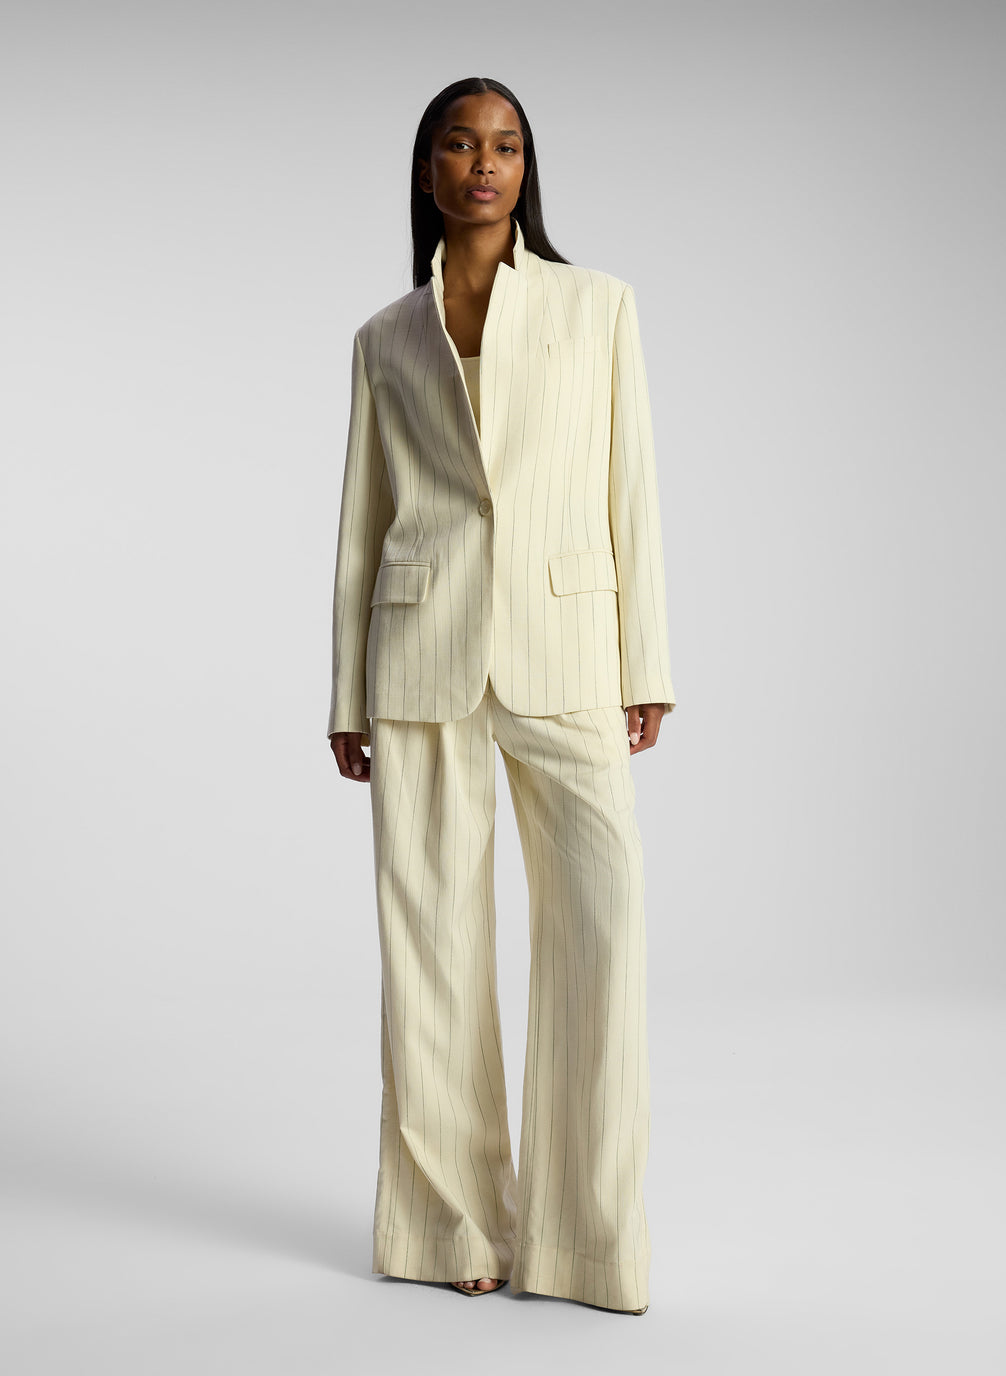 front view of woman wearing cream pinstripe suit